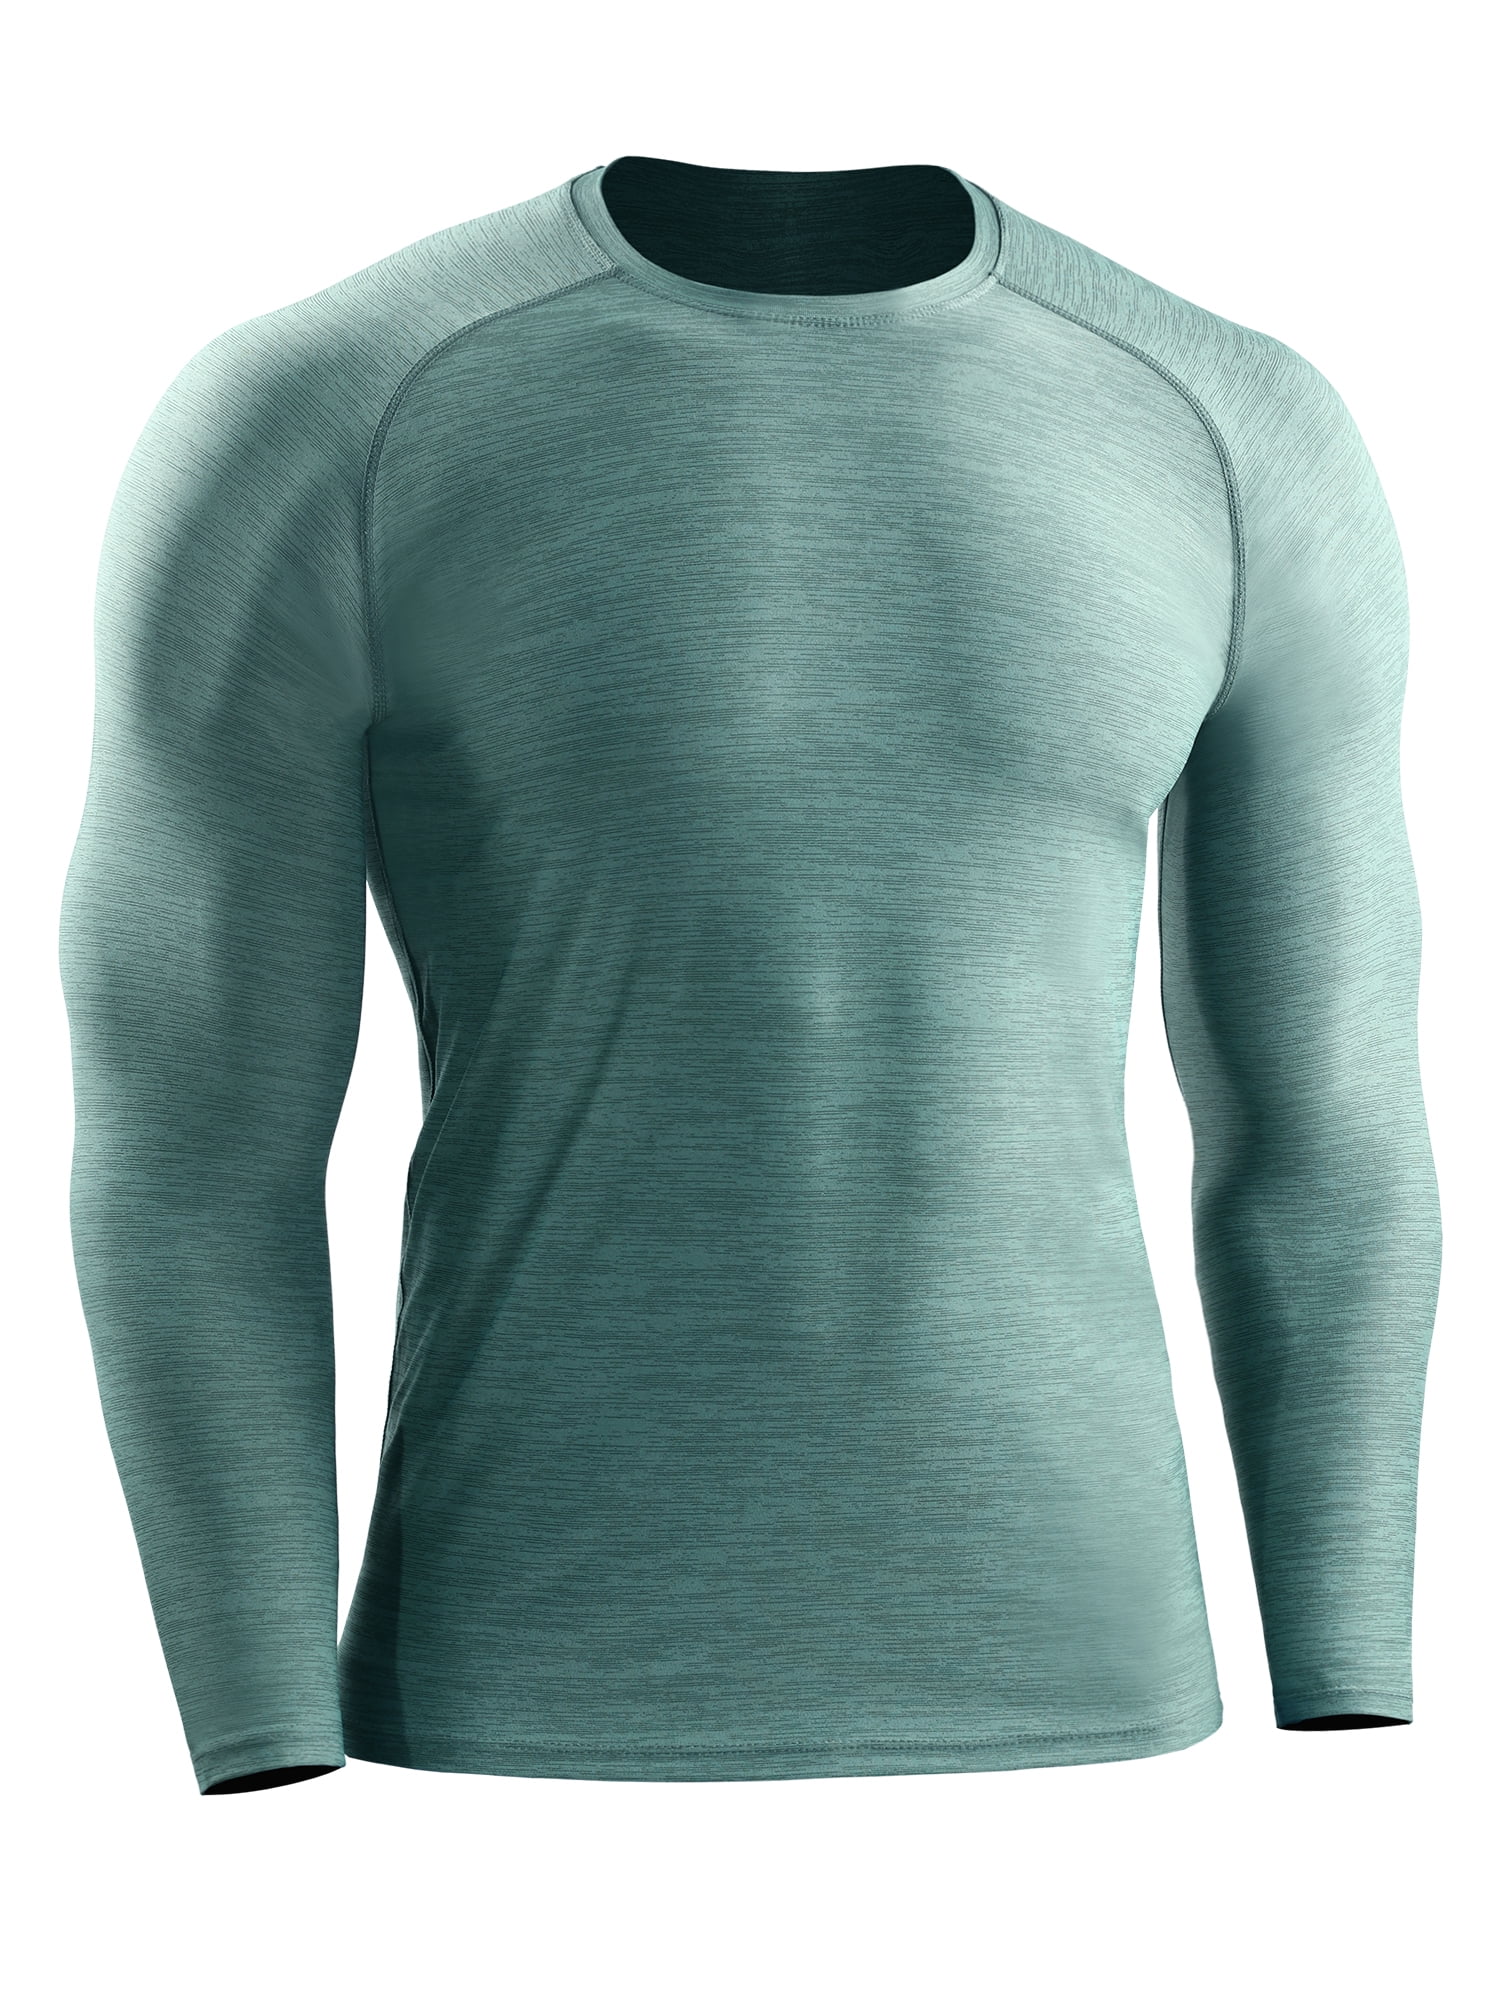 Men Compression Base Layer Thermal Athletic Sports T-Shirts Tops Gym Long Sleeve 